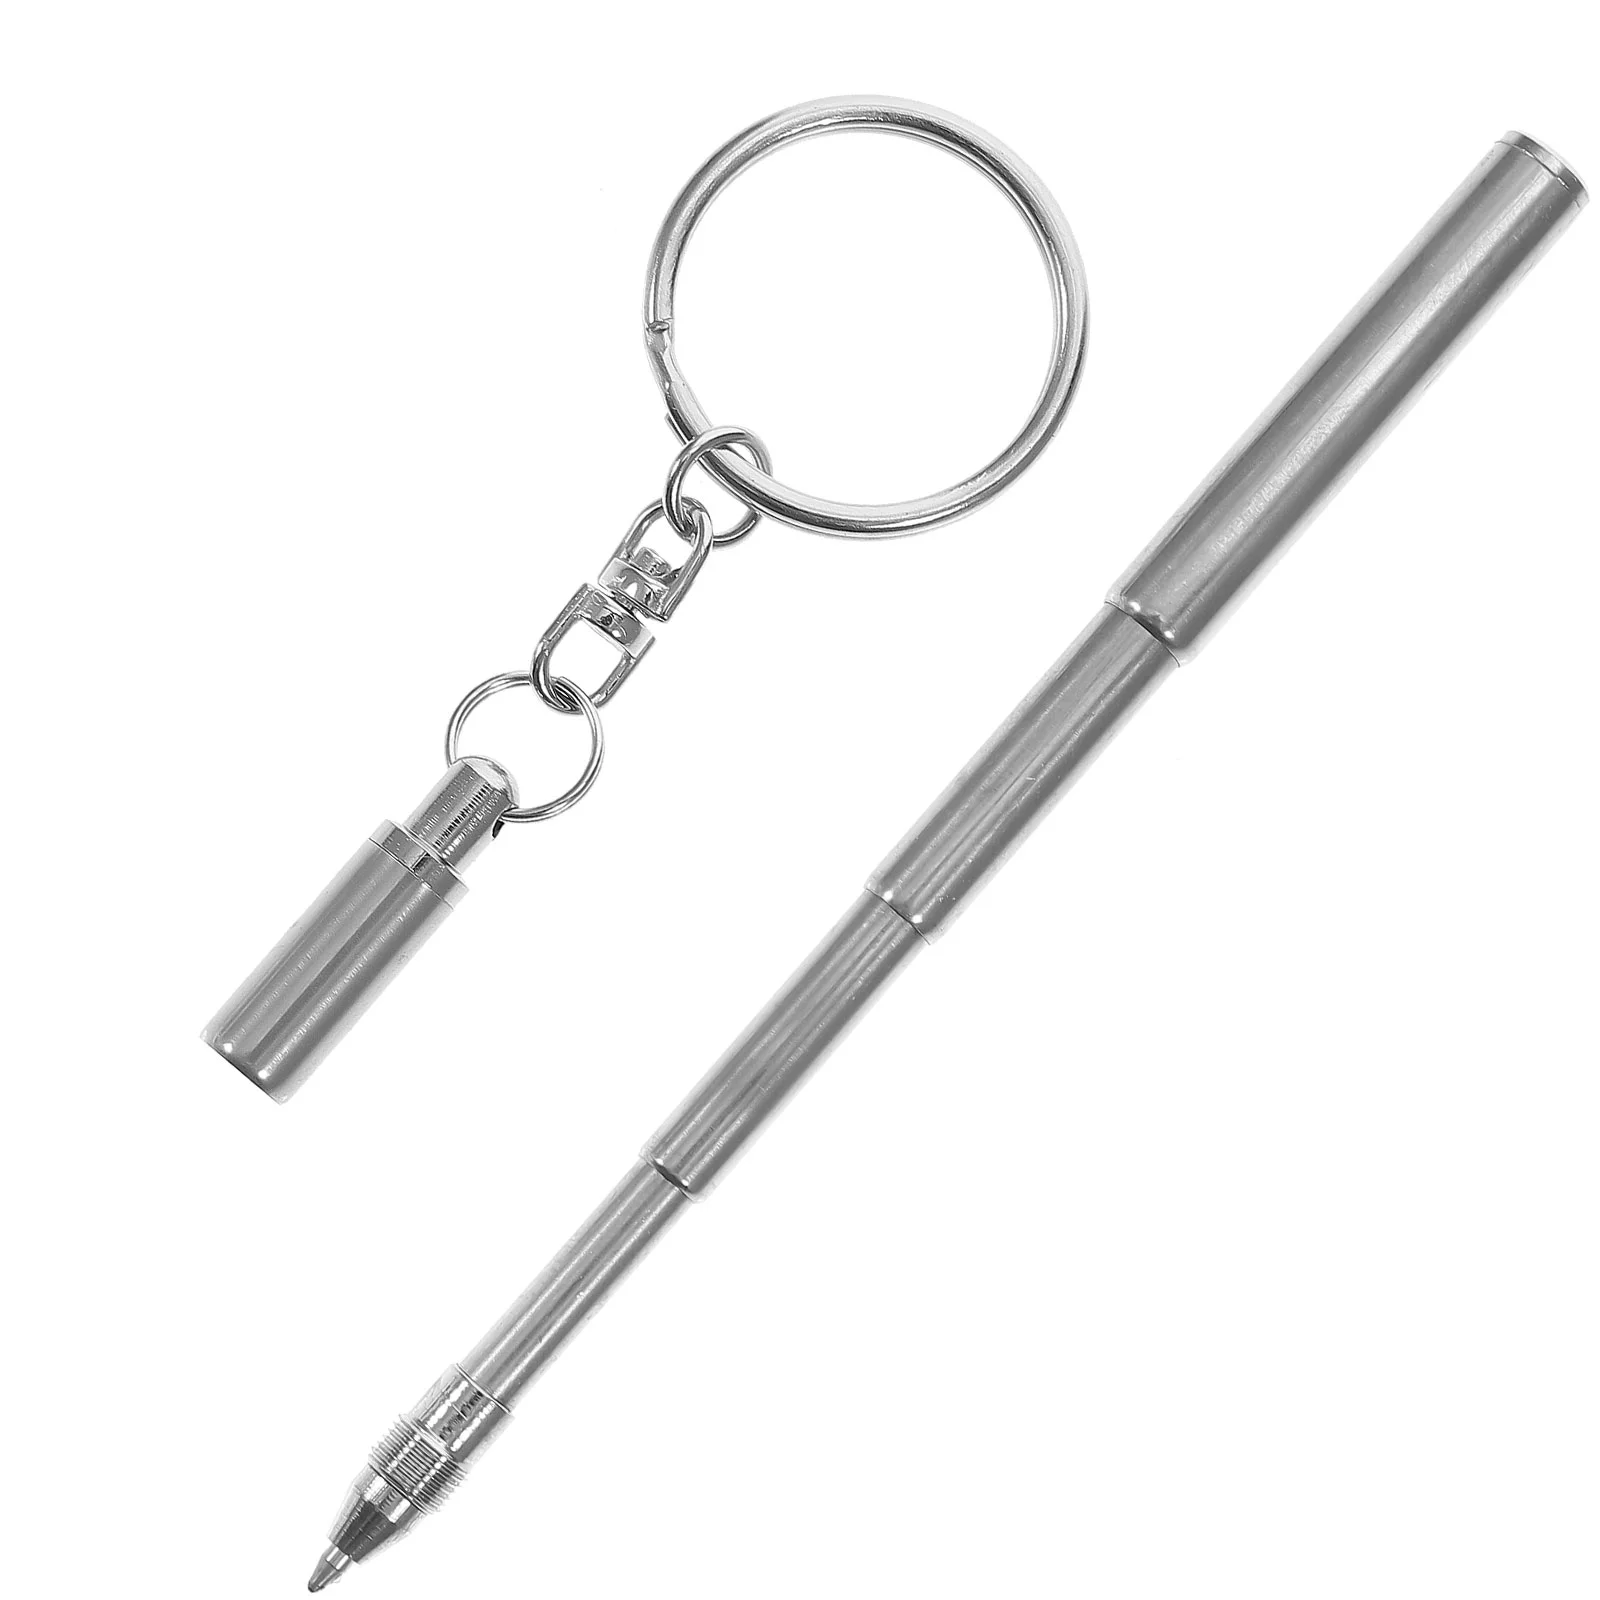 Retractable Pen Shape Keychain Mini Metal Key Ring Portable Stainless Steel Telescopic The Tools Keychain Tools new arrival women s mini stud earring ring jewelry box useful makeup organizer with zipper travel portable bracelet storage case